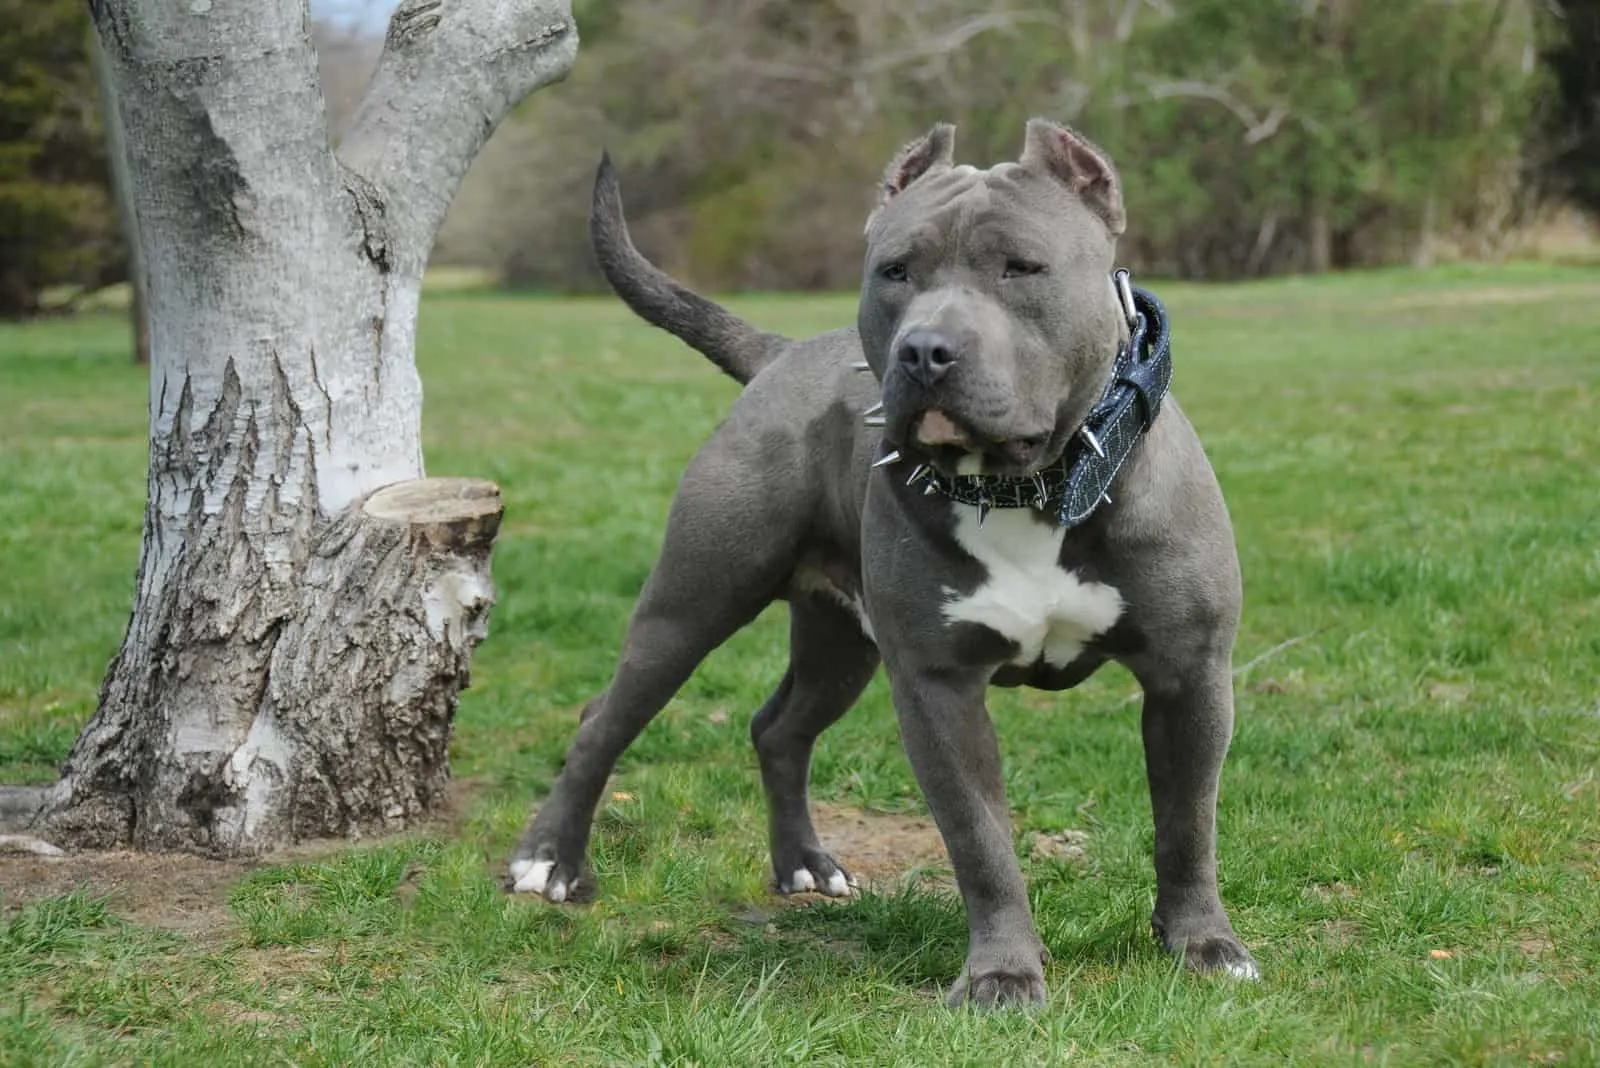 Blue American Bully standing by tree on grass